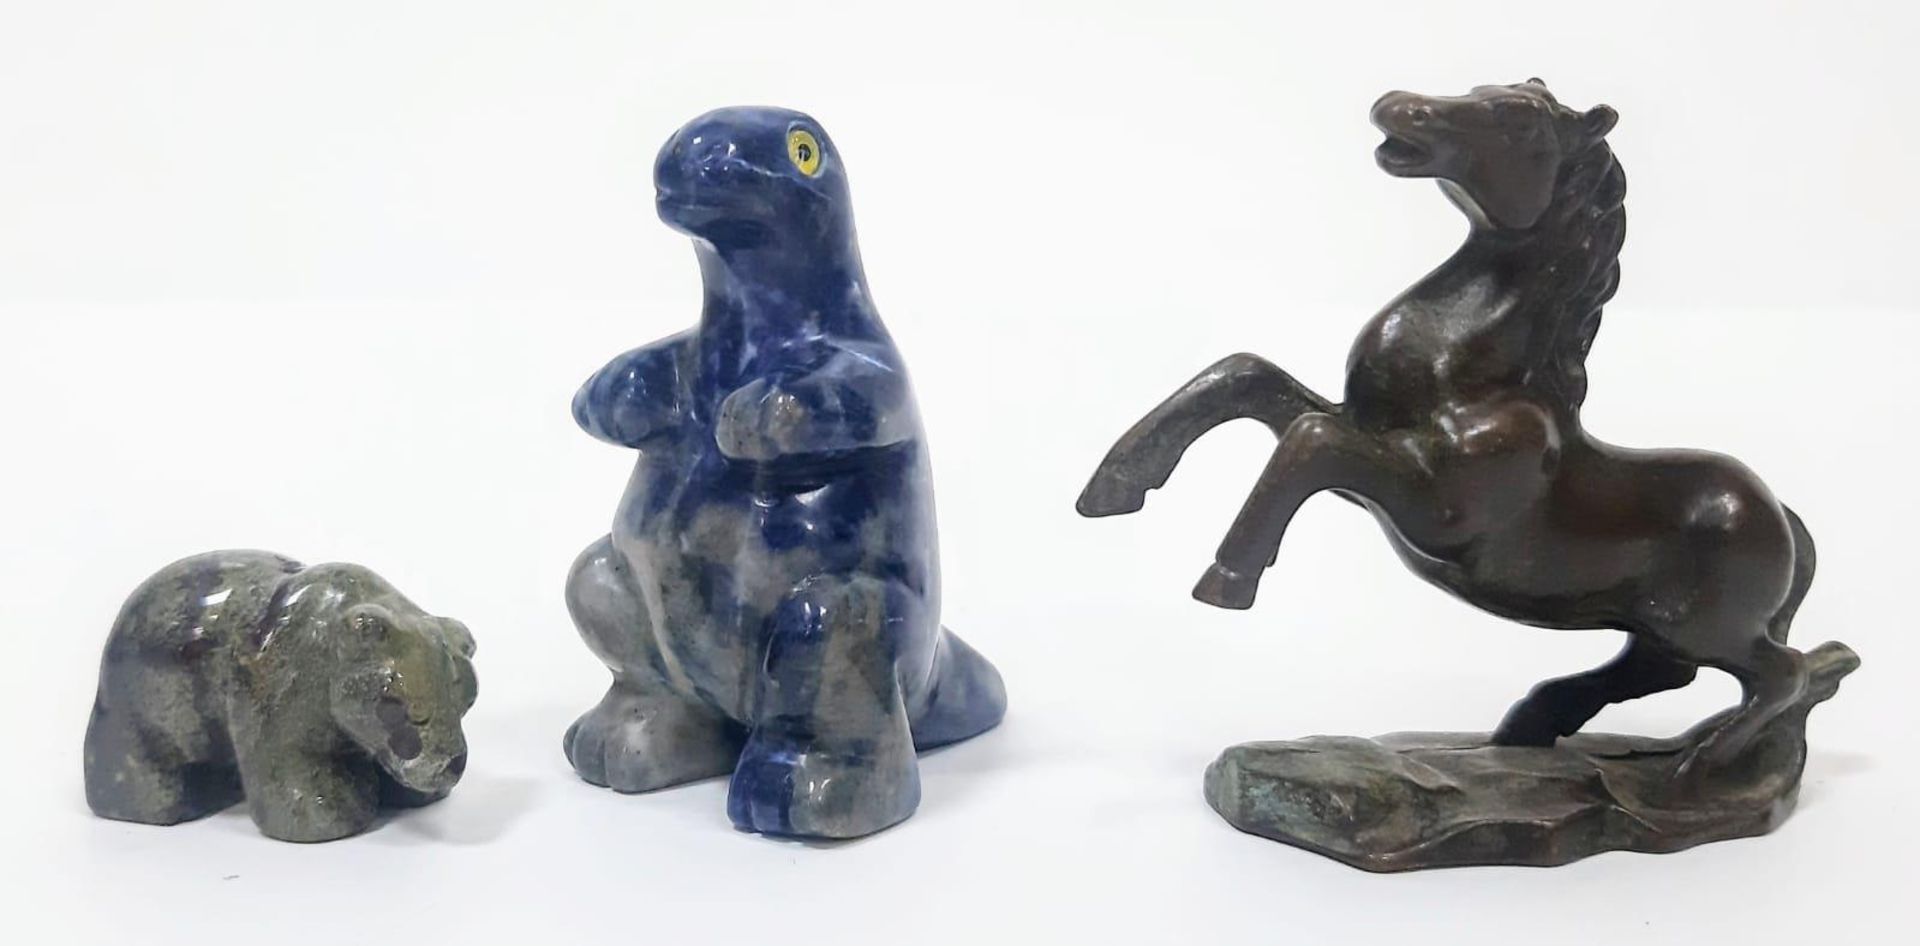 A trio of Animal Figurines. Featuring a stone Bear & standing one eyed Lizard, and a Brass Horse